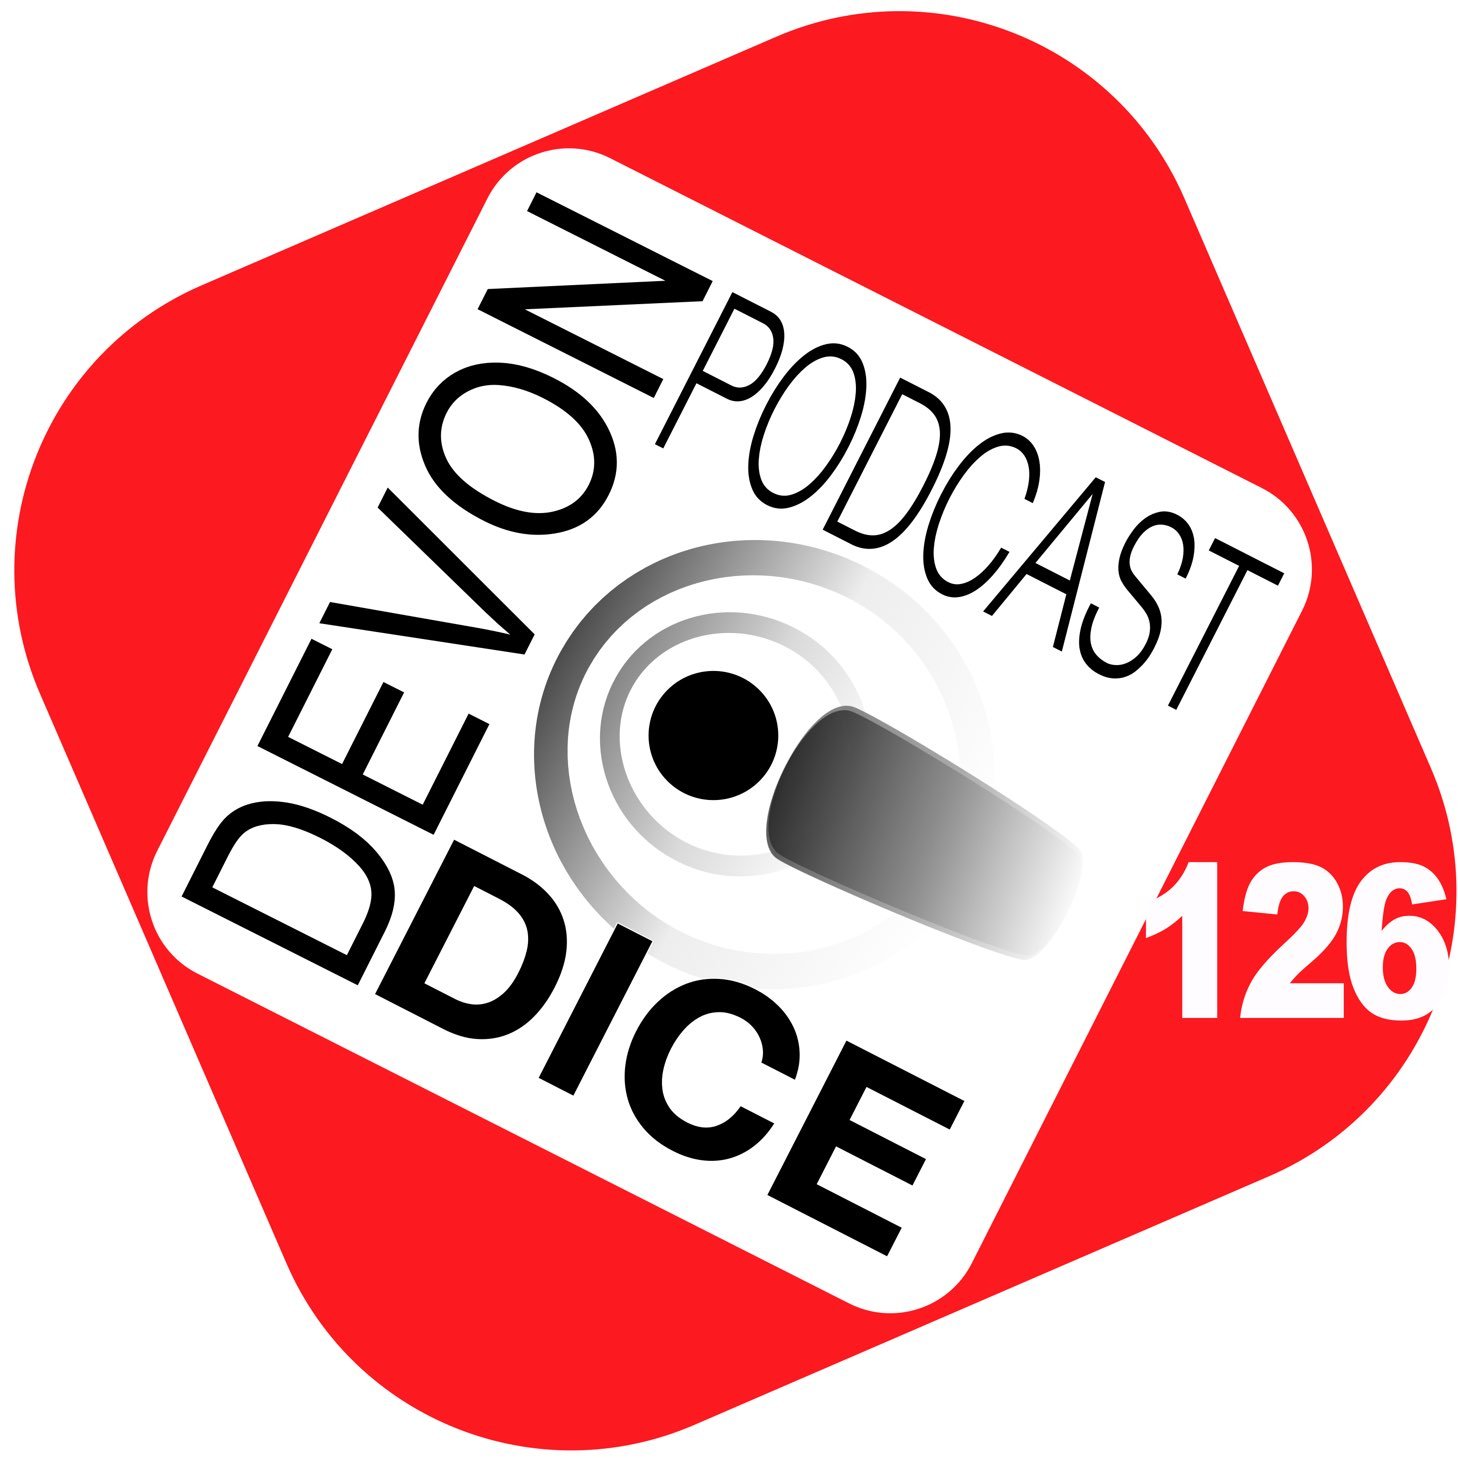 126 Devon Dice Podcast, May board game News Show